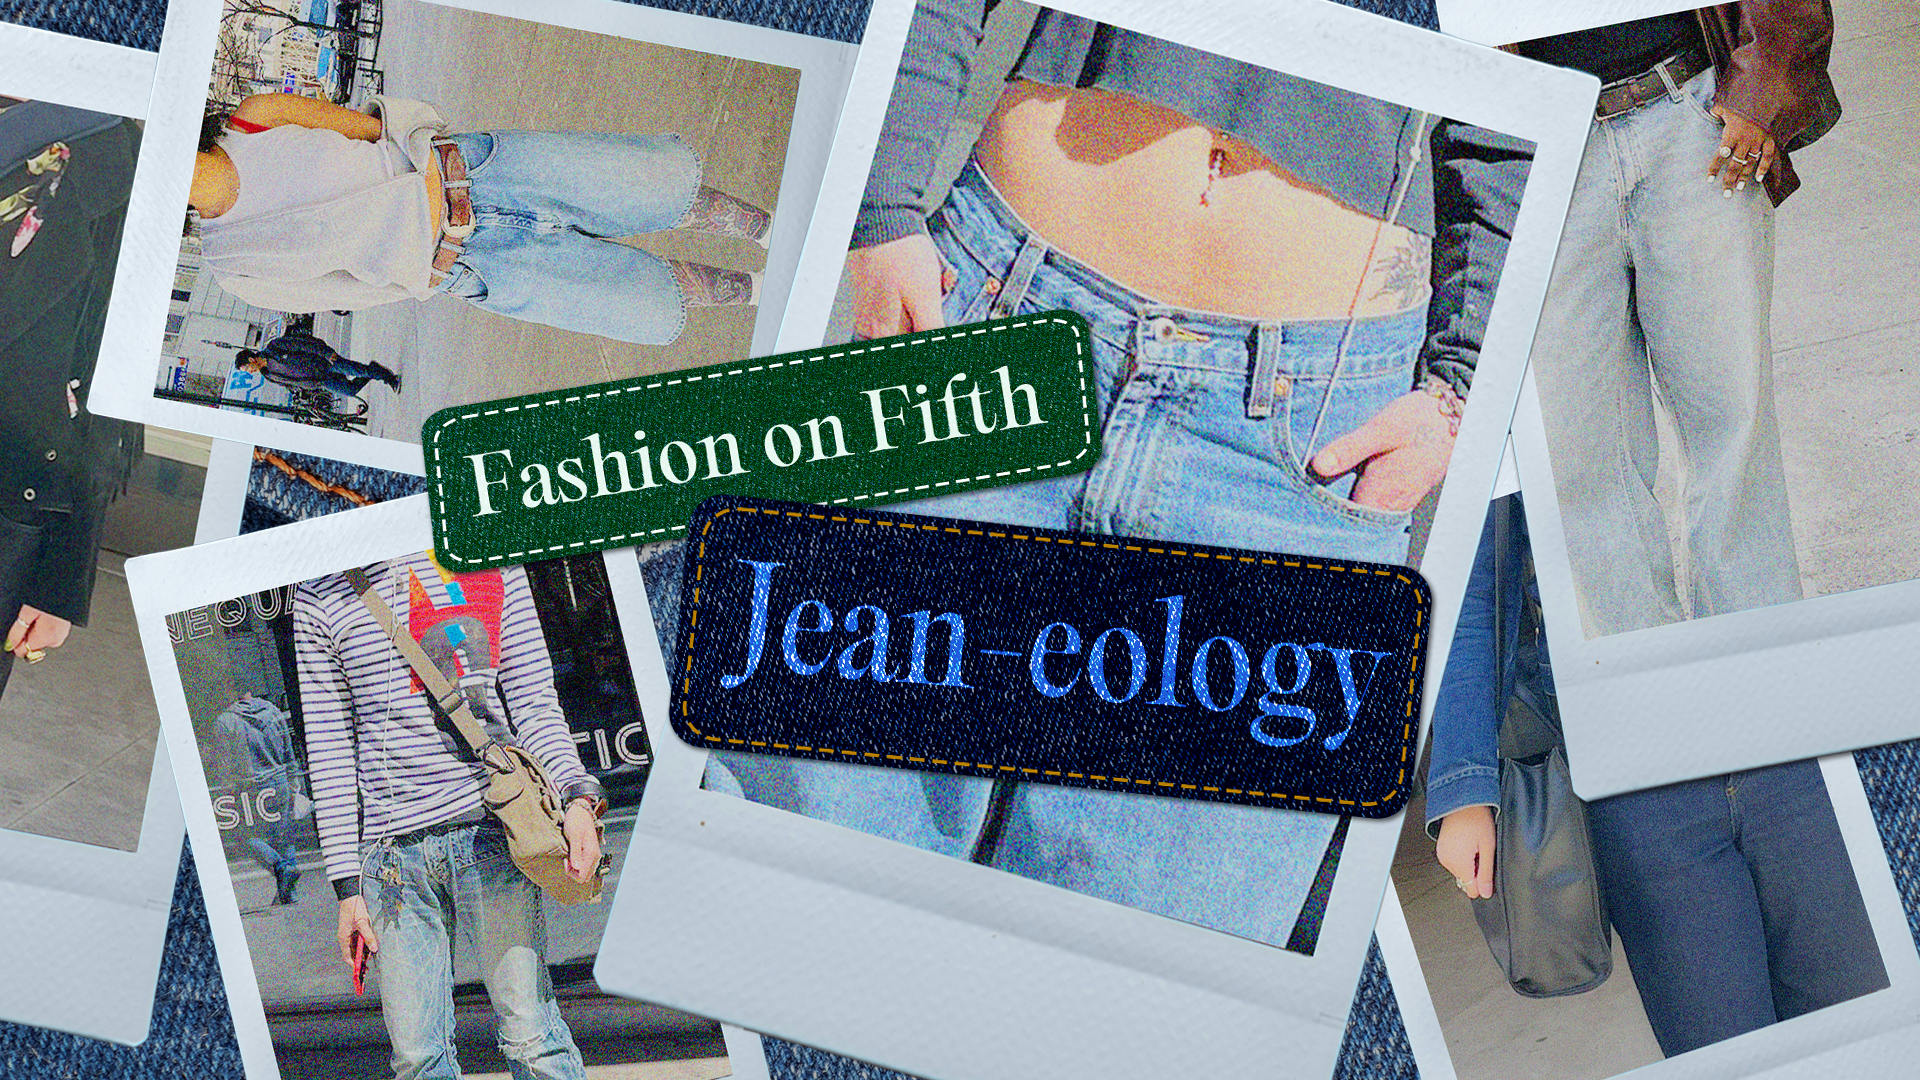 Polaroid pictures of jeans layered on top of each other with the words “Fashion on Fifth” and “Jean-eology” patched on top.